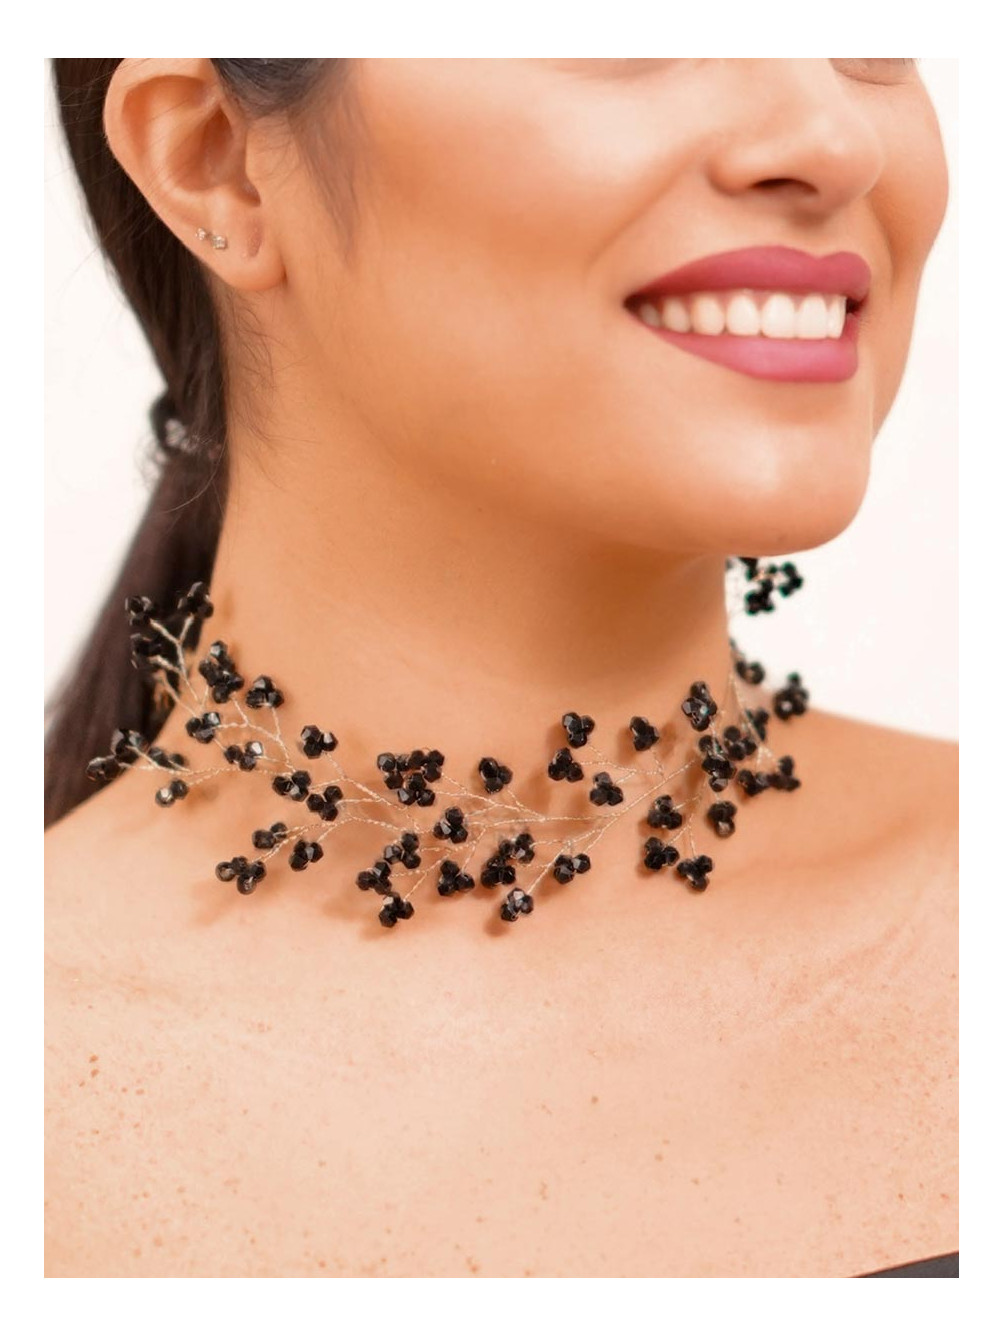 Choker Moldeable Piedras, Choker Mujer, Complementos Mujer, Mariquita Trasquilá